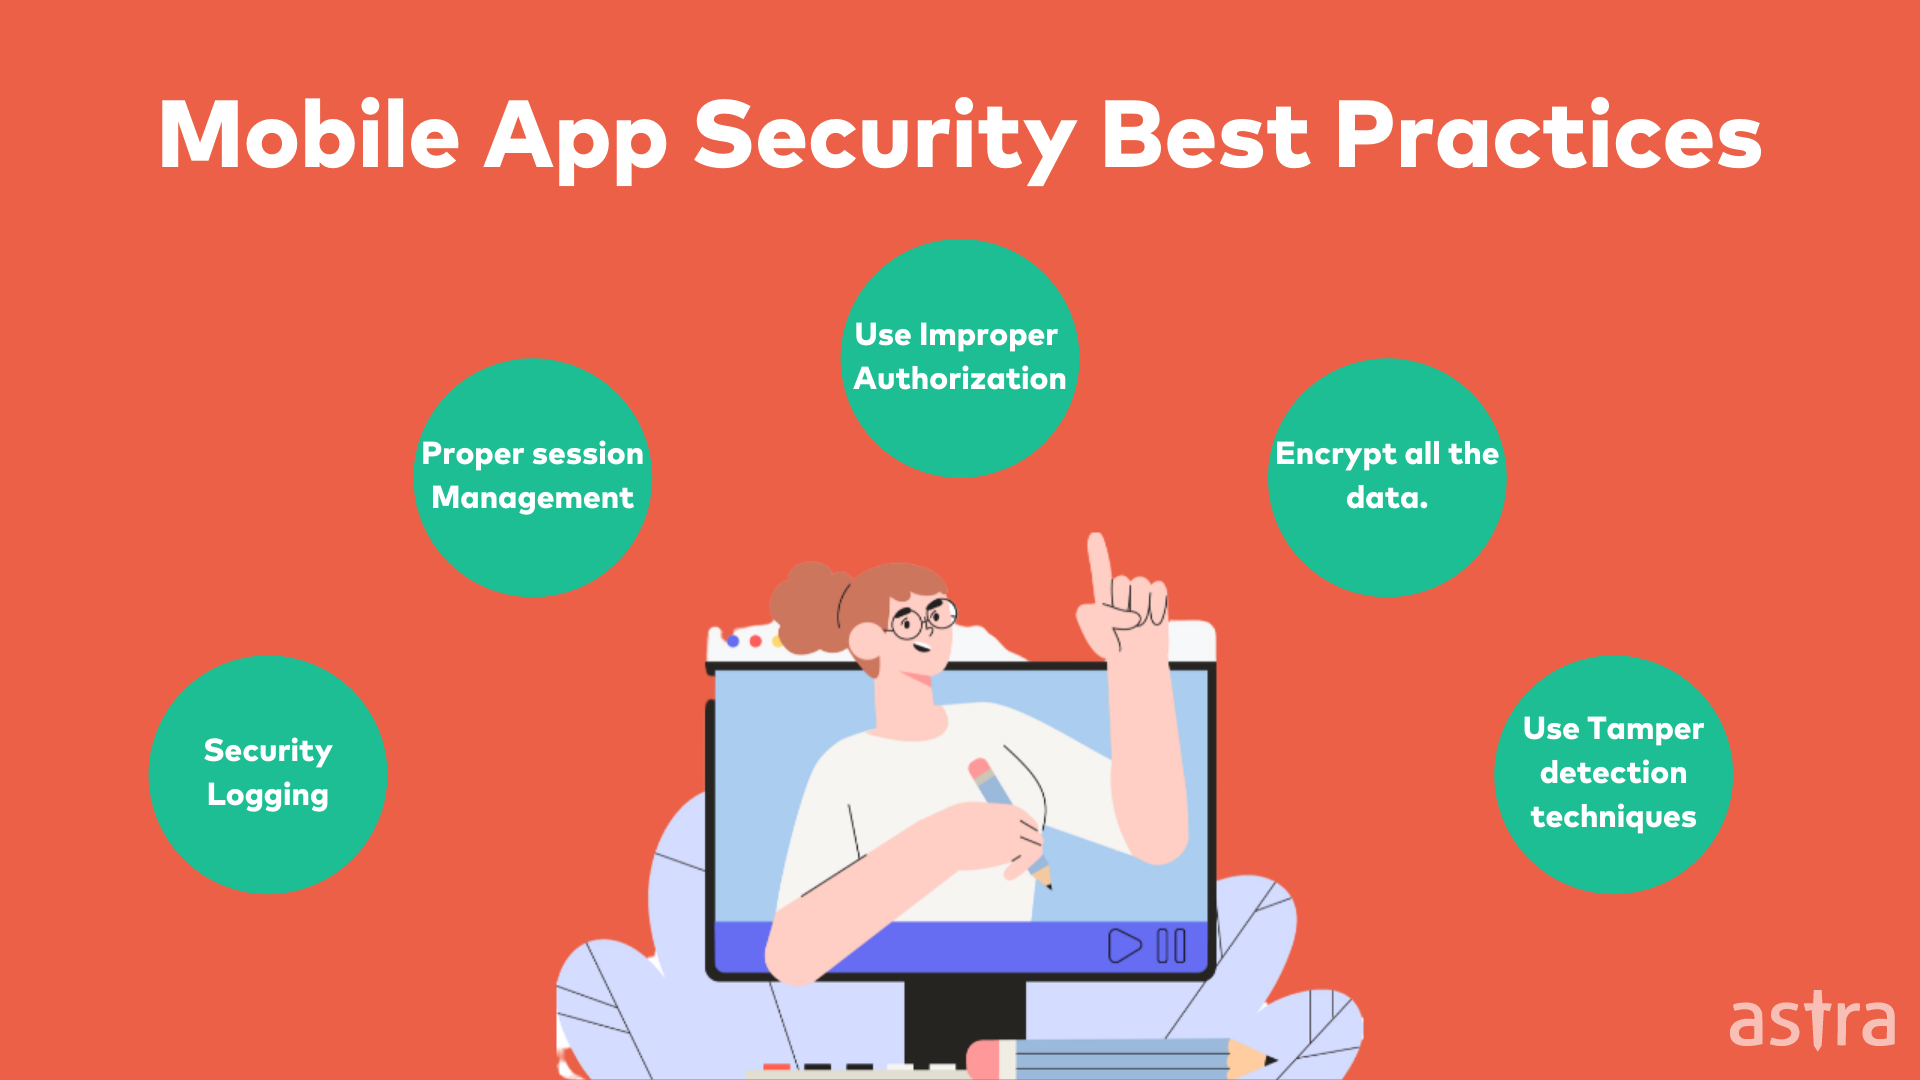 Mobile App Security Best Practices 